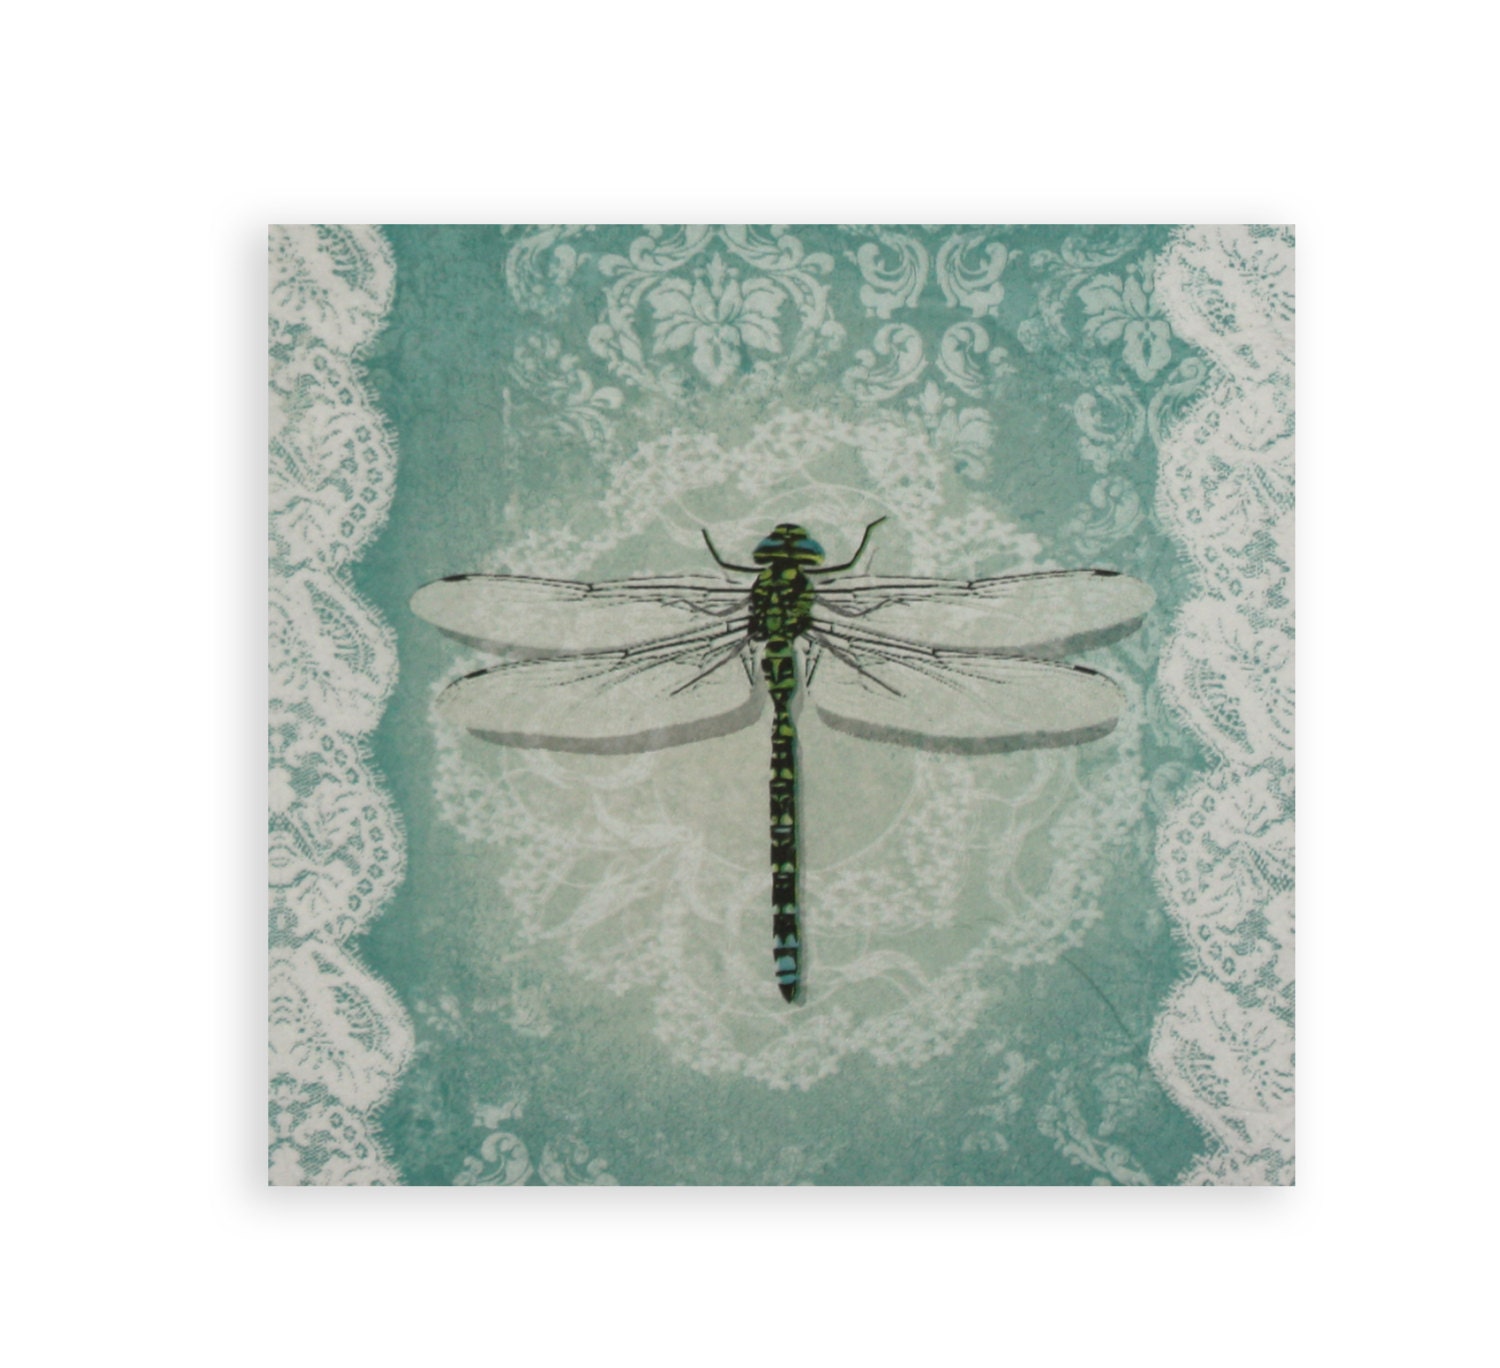 Dragonfly paper napkin for decoupage mixed media collage